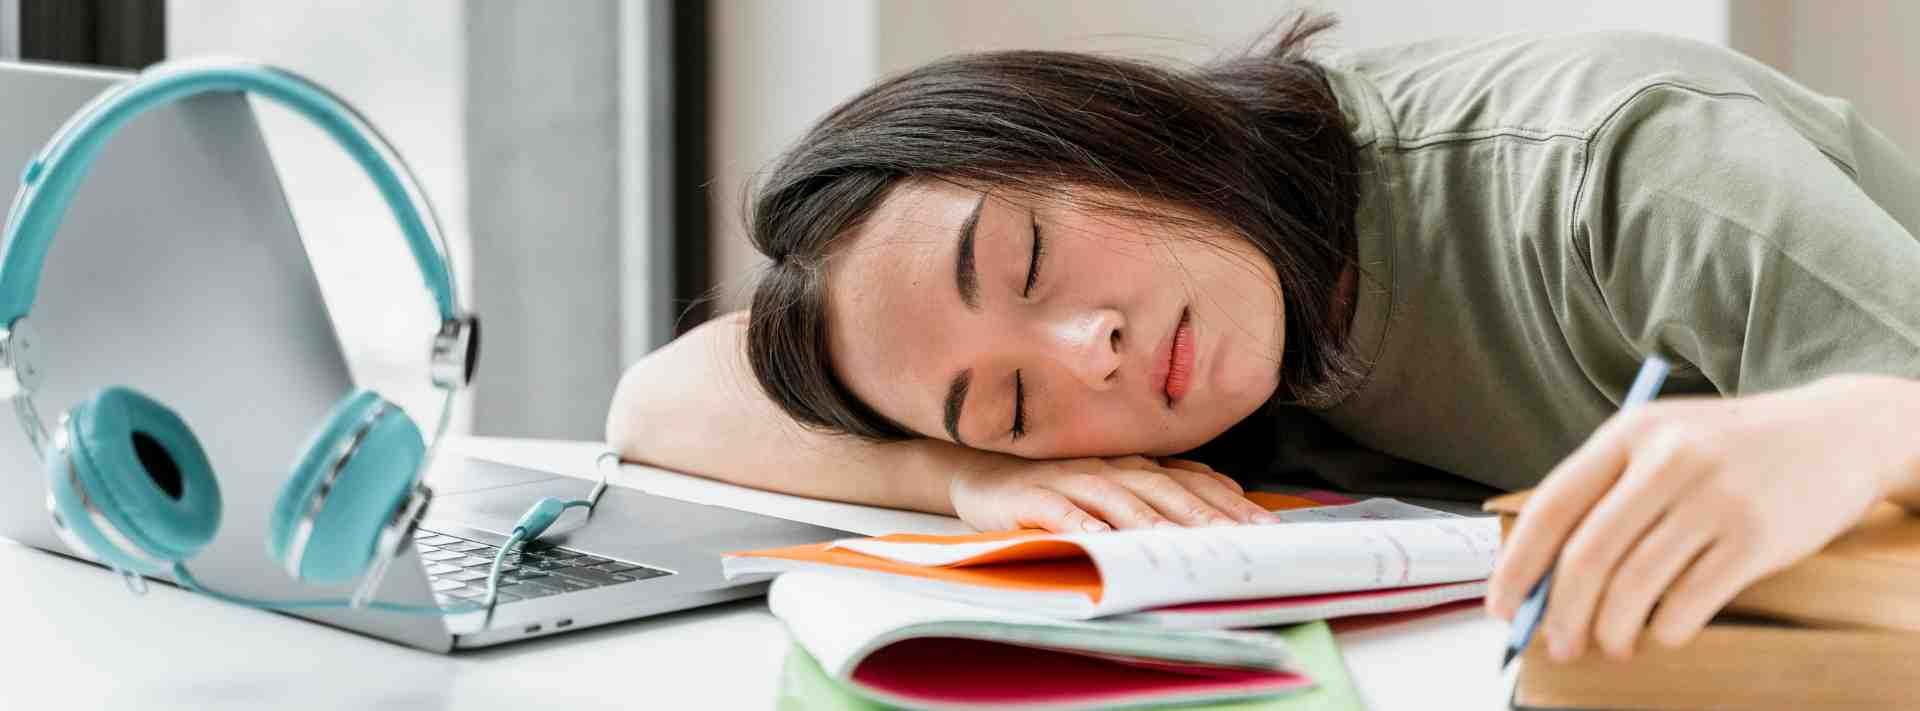 Importance of Sleep for Teenagers 2023: Causes, Effects, Prevention, Tips